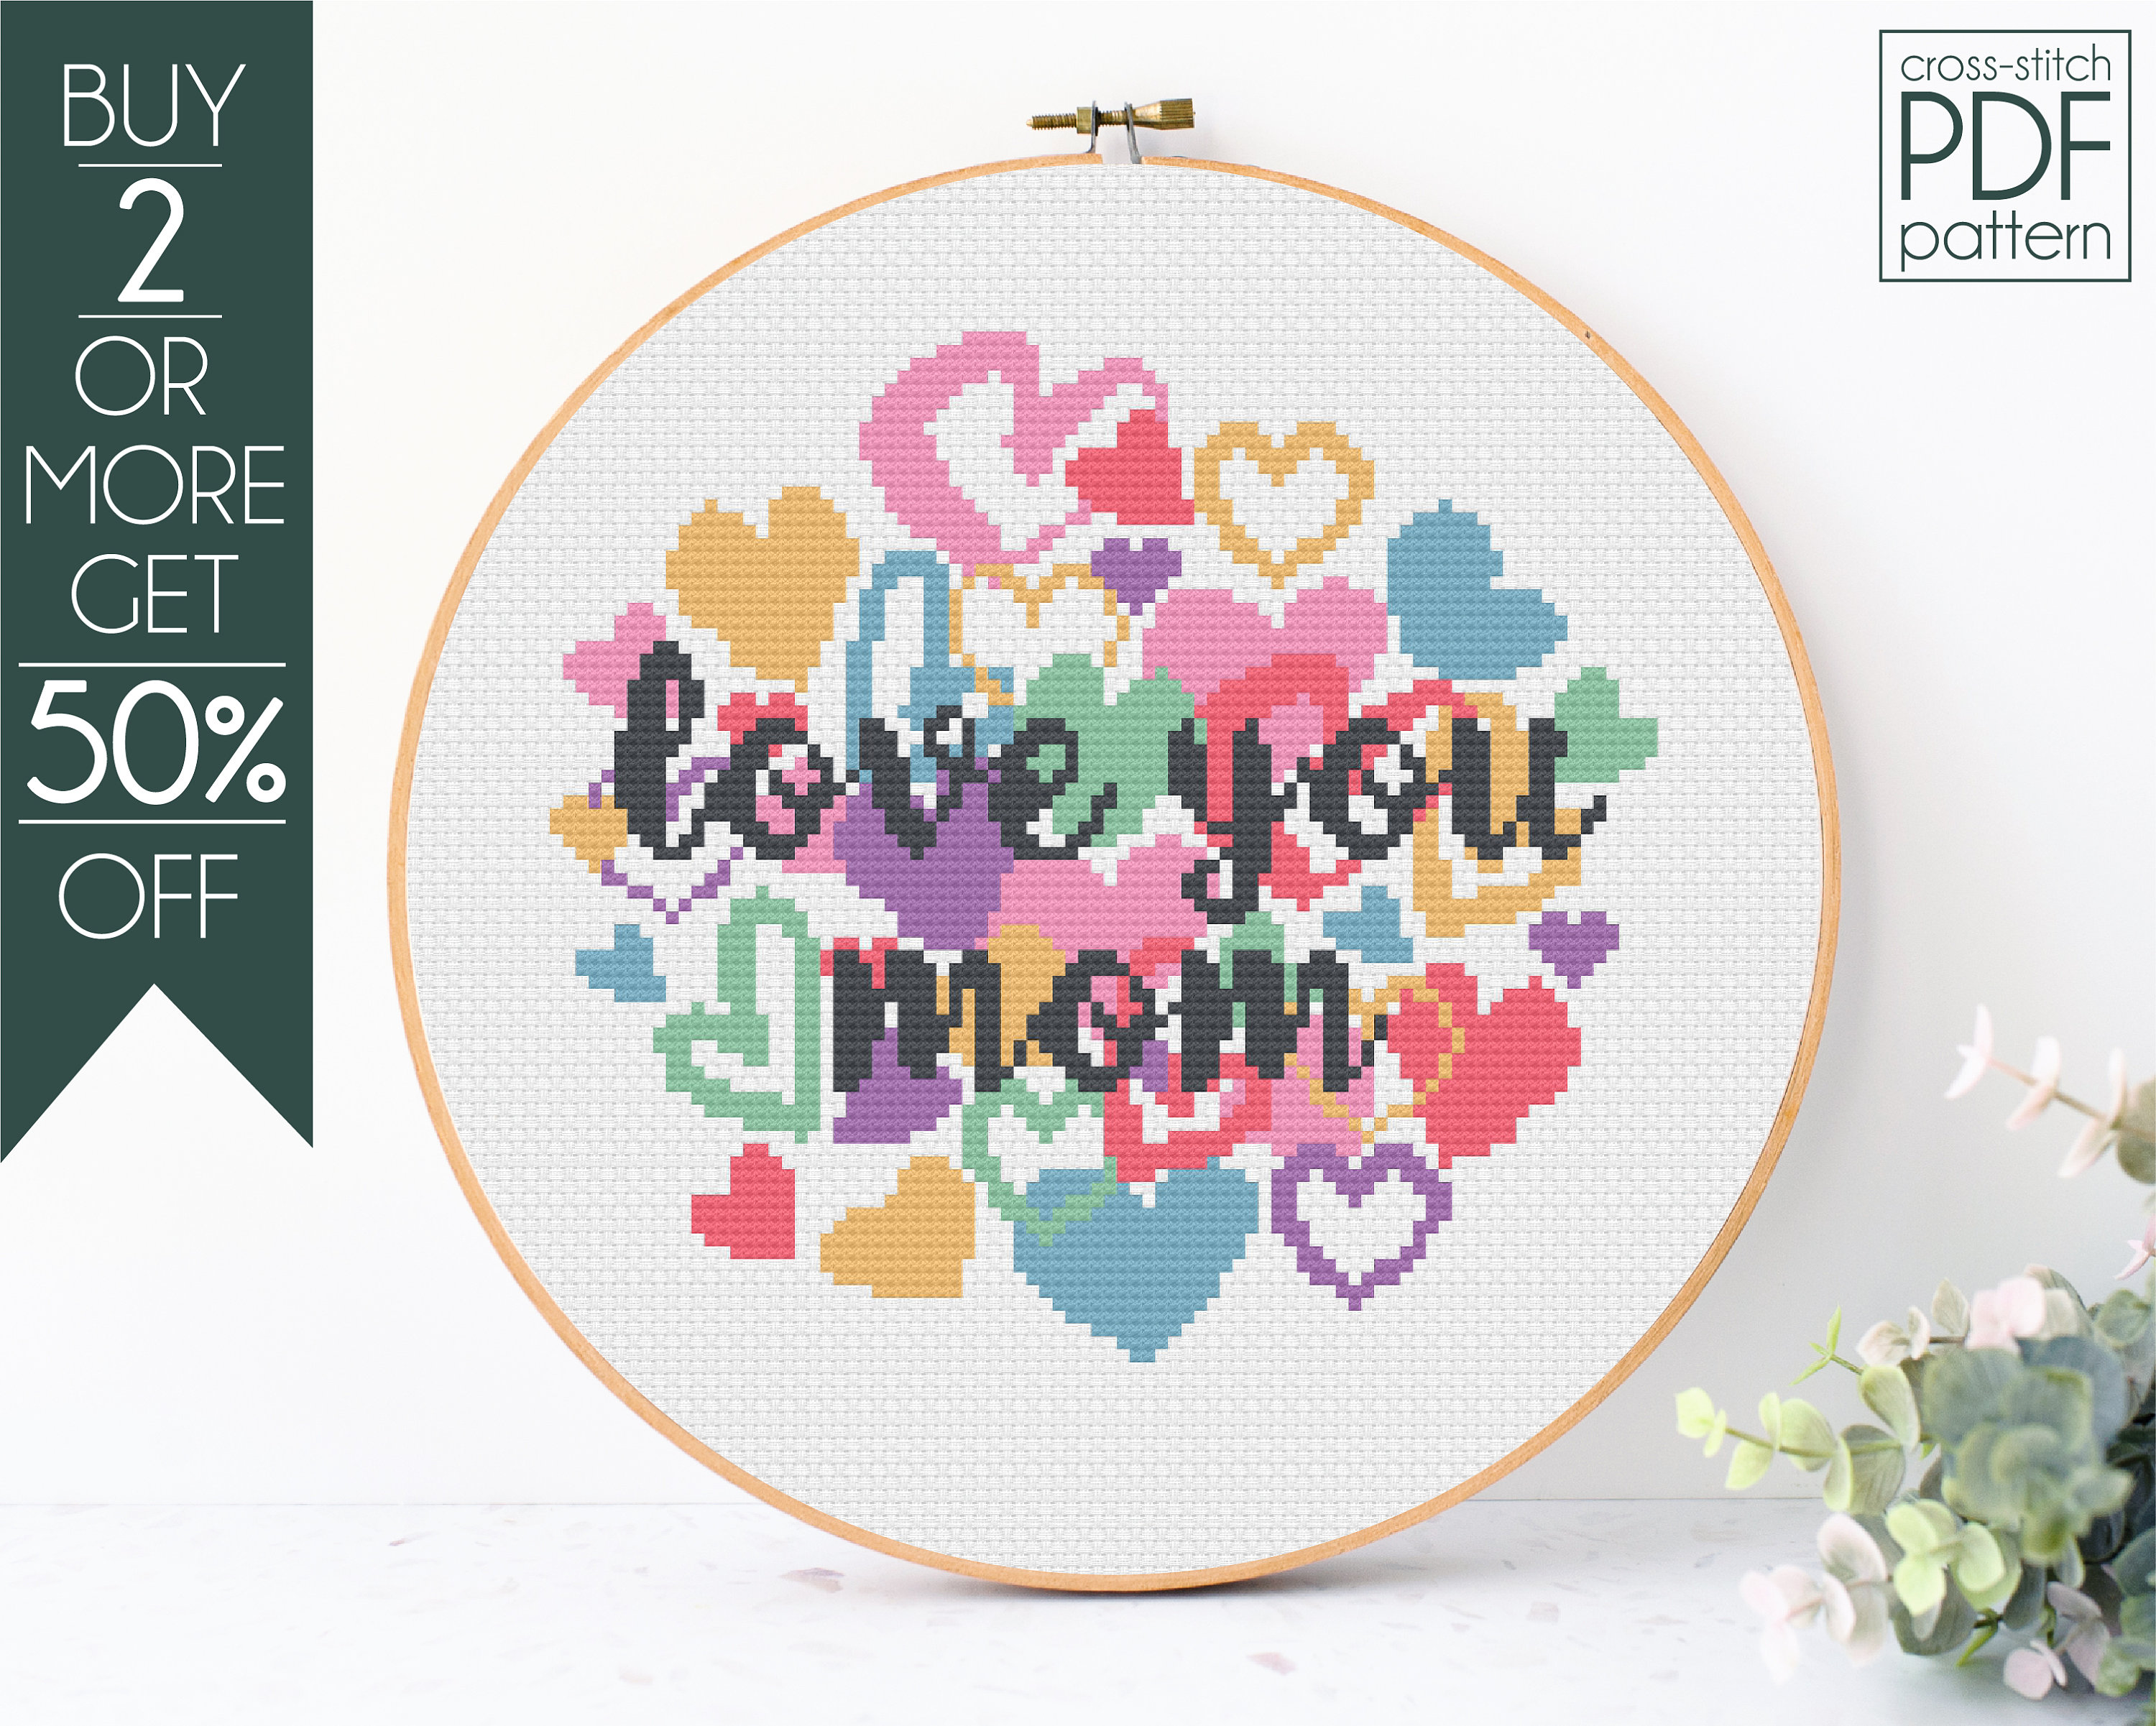 Counted Cross Stitch Patterns My Mom Graphic by crossstitchpatterns ·  Creative Fabrica